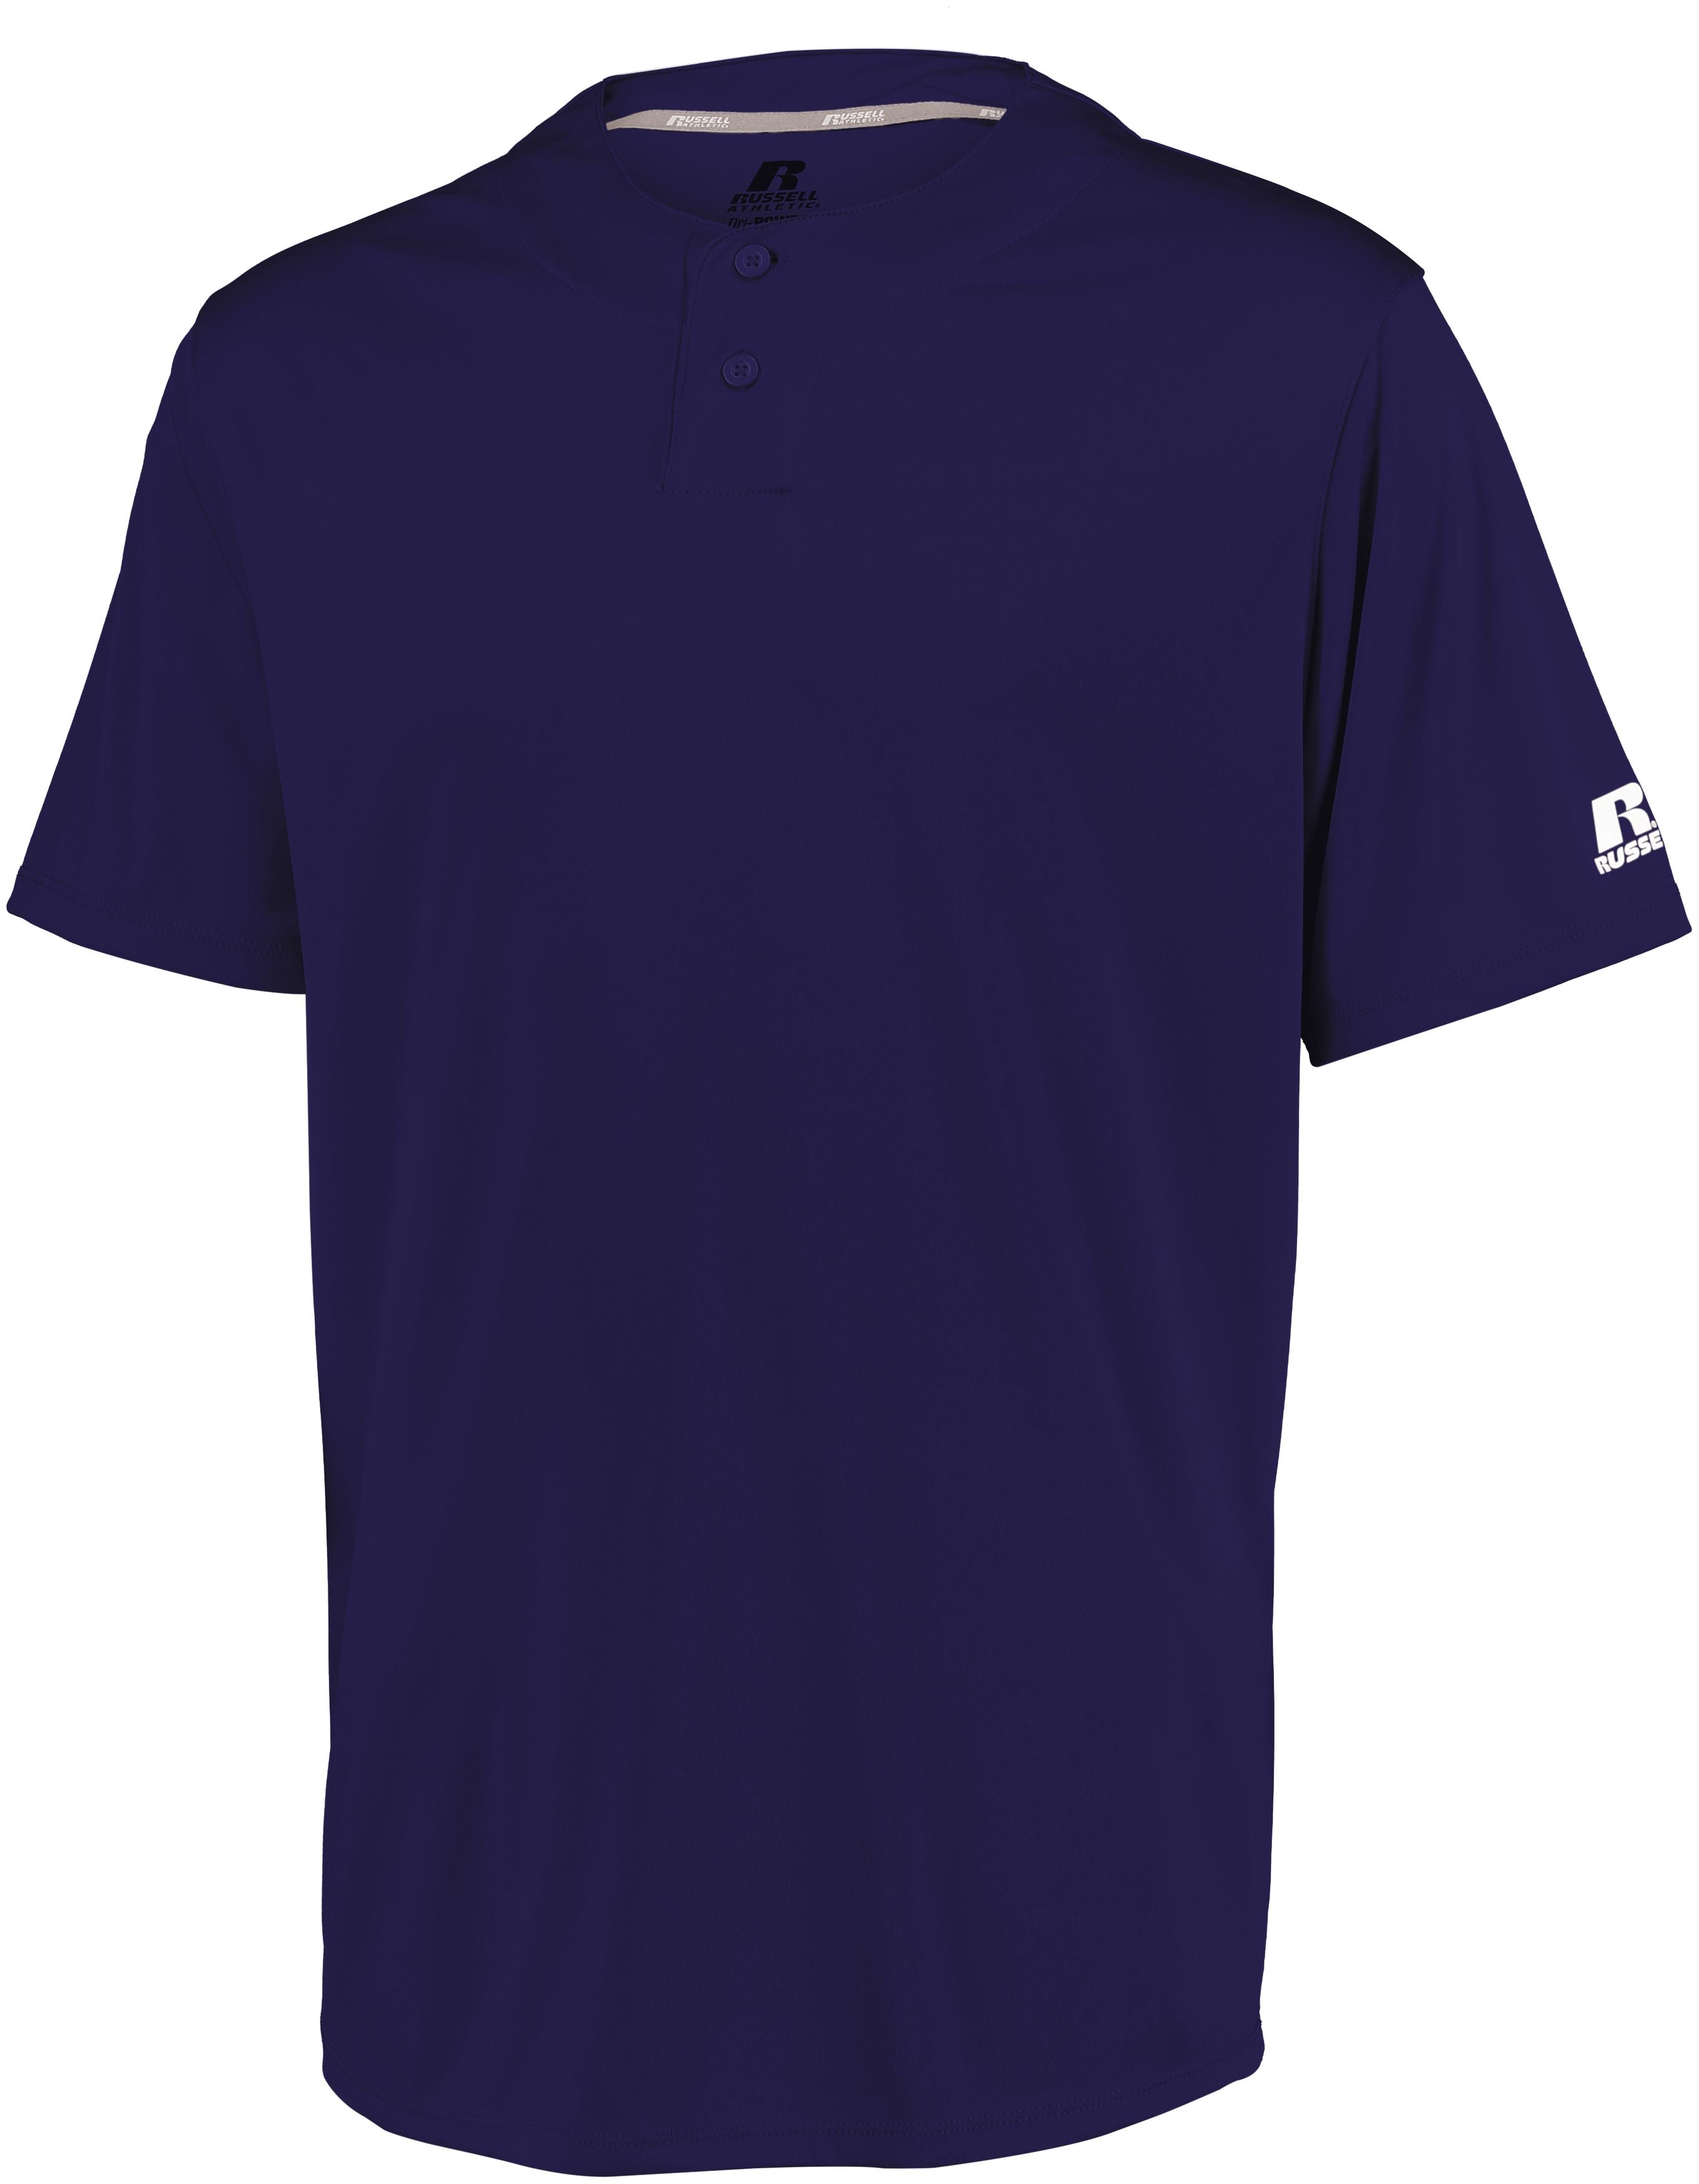 Russell Athletic Youth Performance Two-Button Solid Jersey in Purple  -Part of the Youth, Youth-Jersey, Baseball, Russell-Athletic-Products, Shirts, All-Sports, All-Sports-1 product lines at KanaleyCreations.com